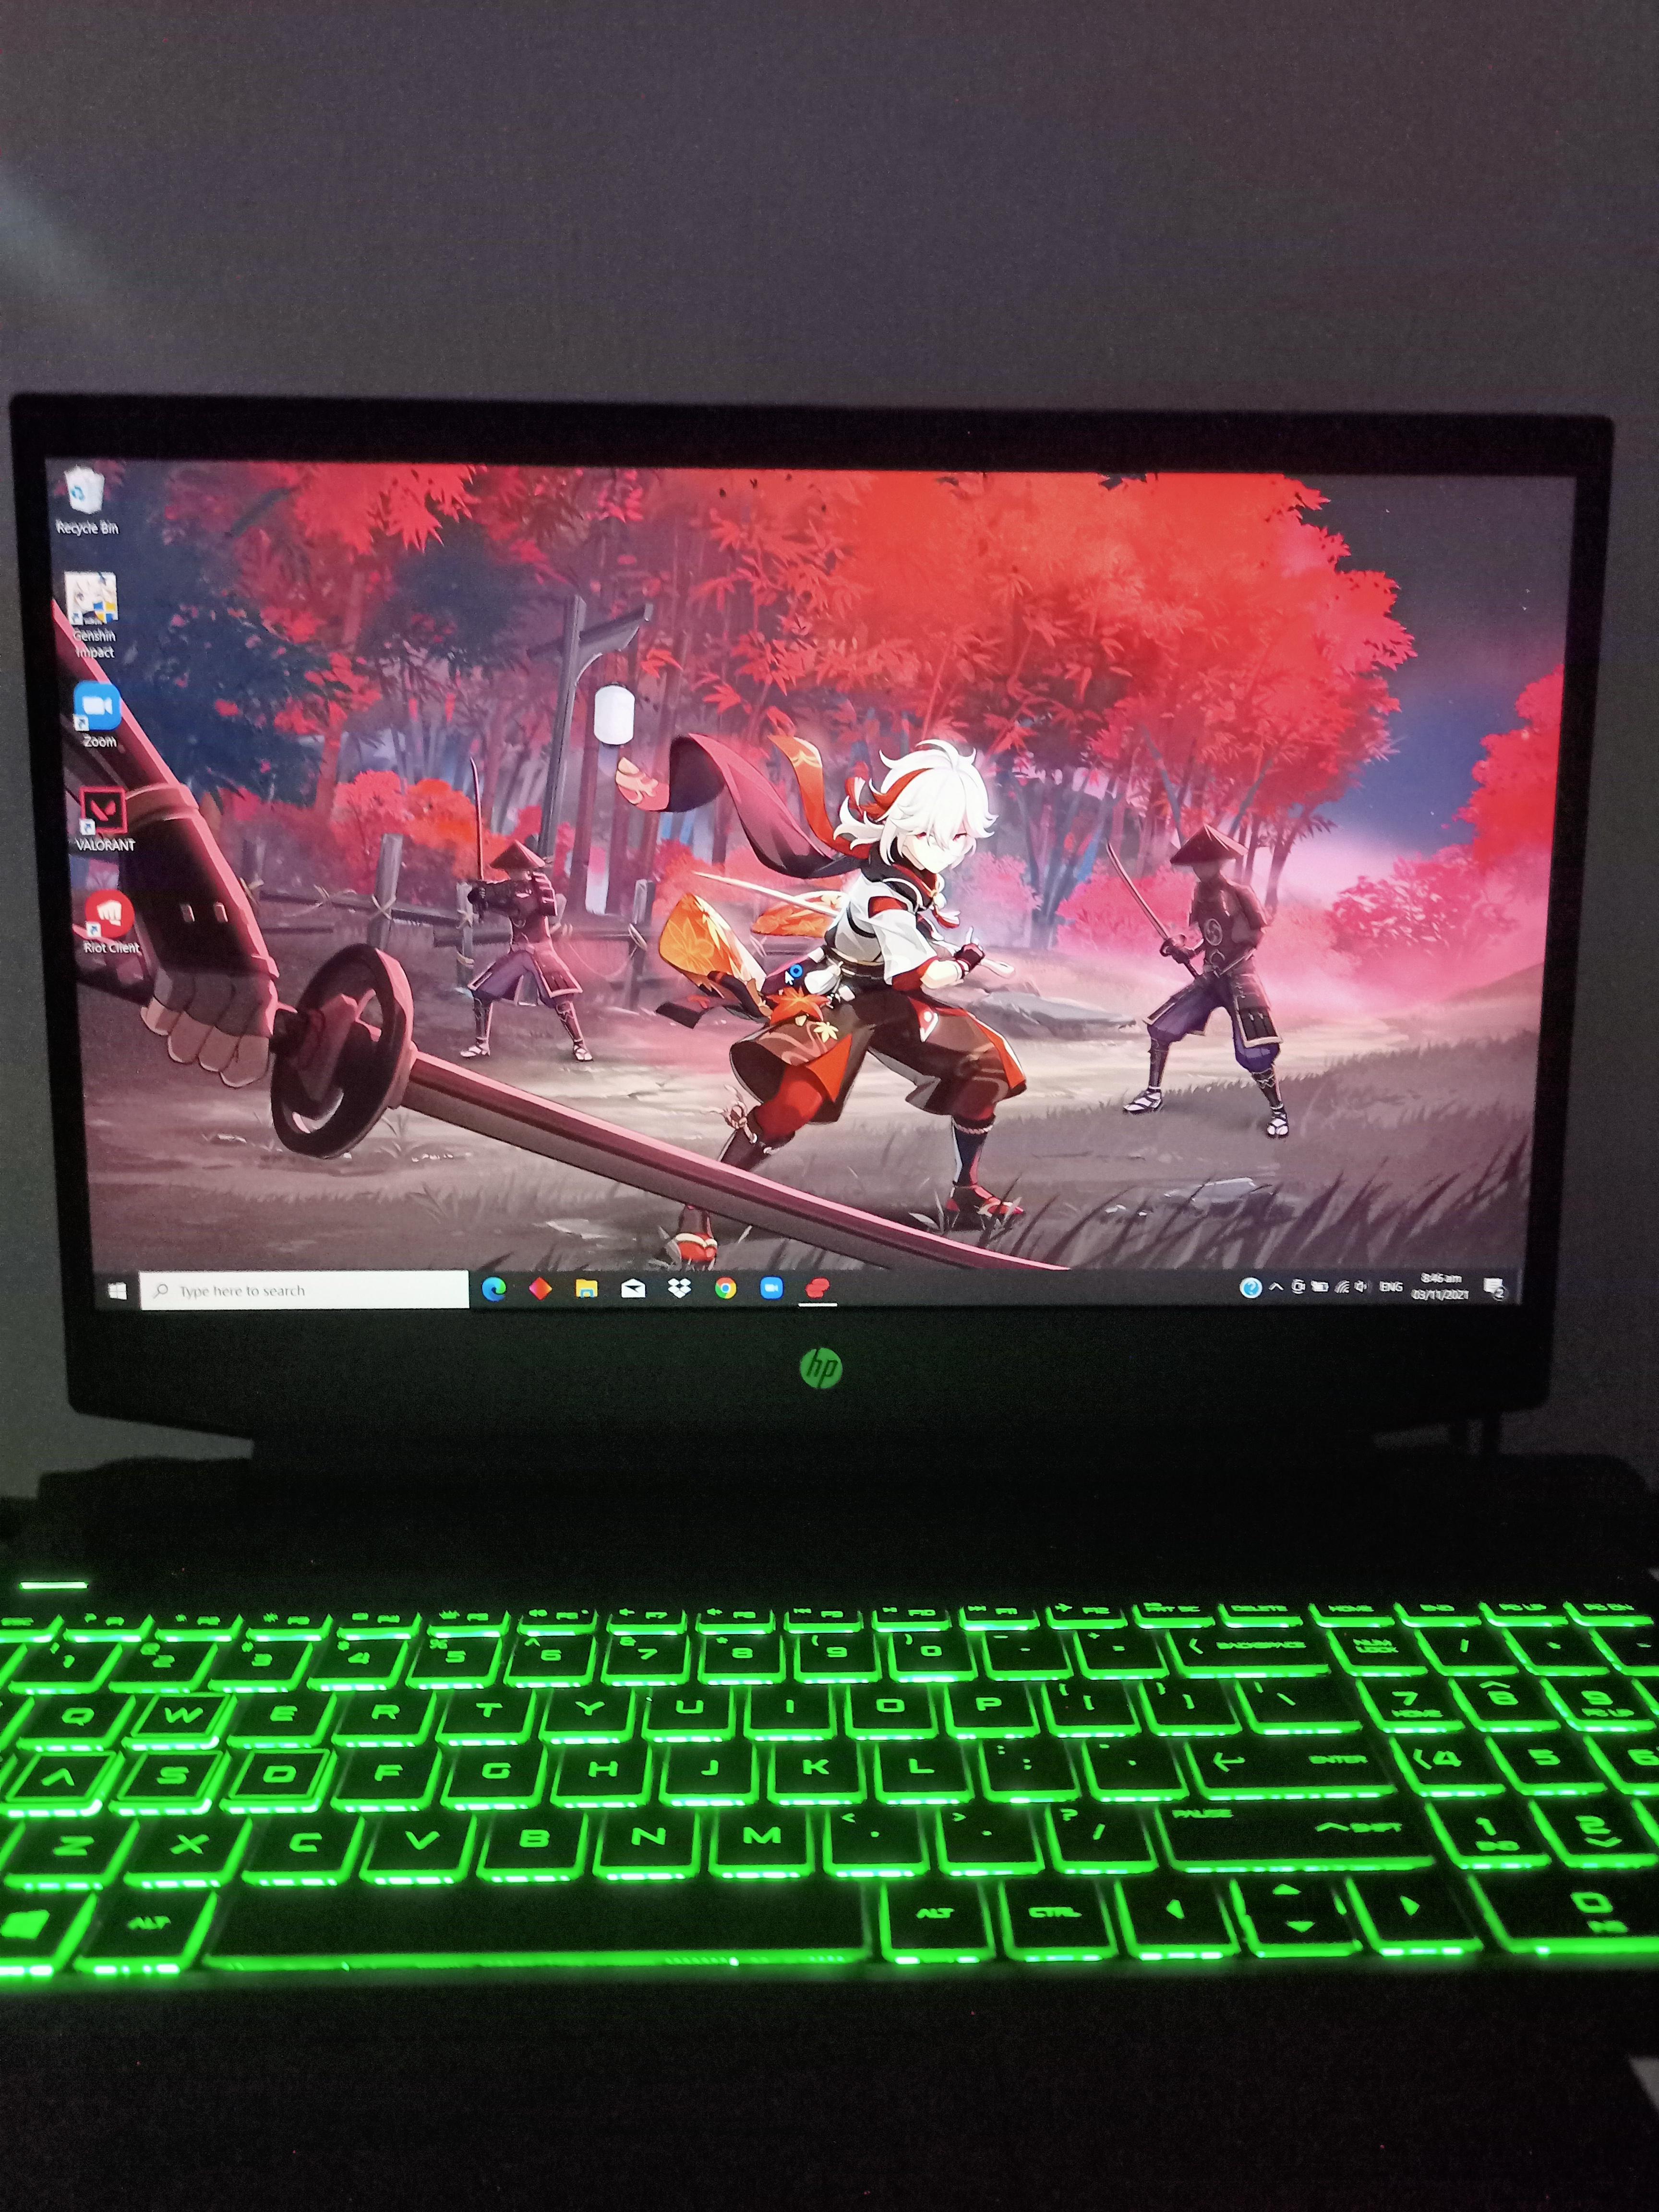 This may not be essential but with the help of Avocado Guild 🥑. I was able to purchase laptop that I need for school since I'm an engineering student that requires laptop for autocad. Thank you to all mods, cores and leaders. I am not a student-left-behind anymore. Claim it that you'll achieve something greater and may God bless us all . ✨